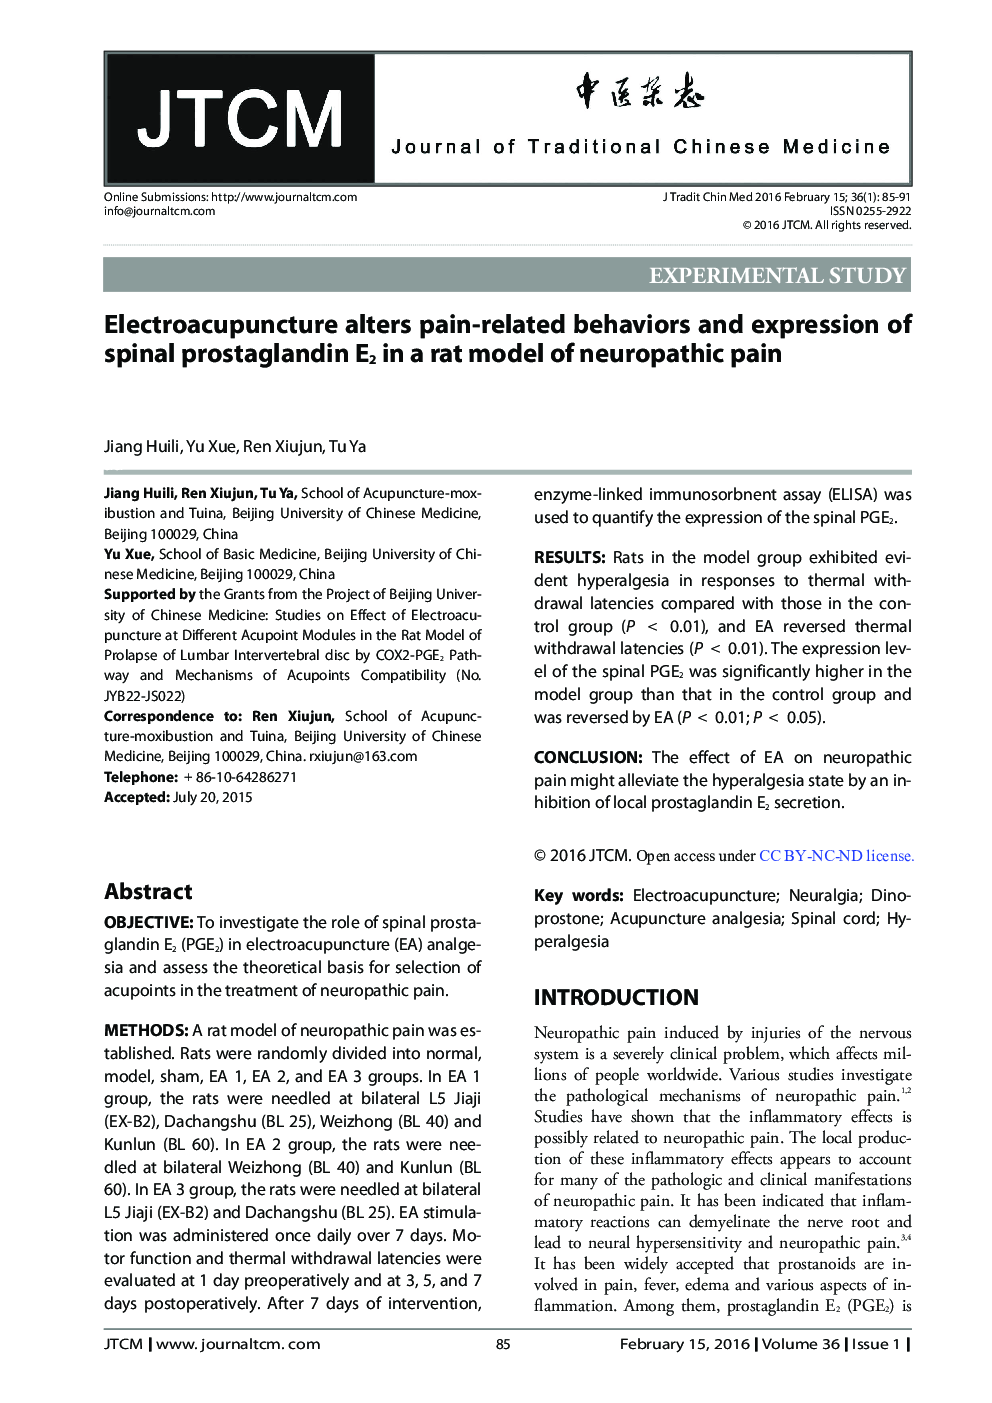 Electroacupuncture alters pain-related behaviors and expression of spinal prostaglandin E2 in a rat model of neuropathic pain 